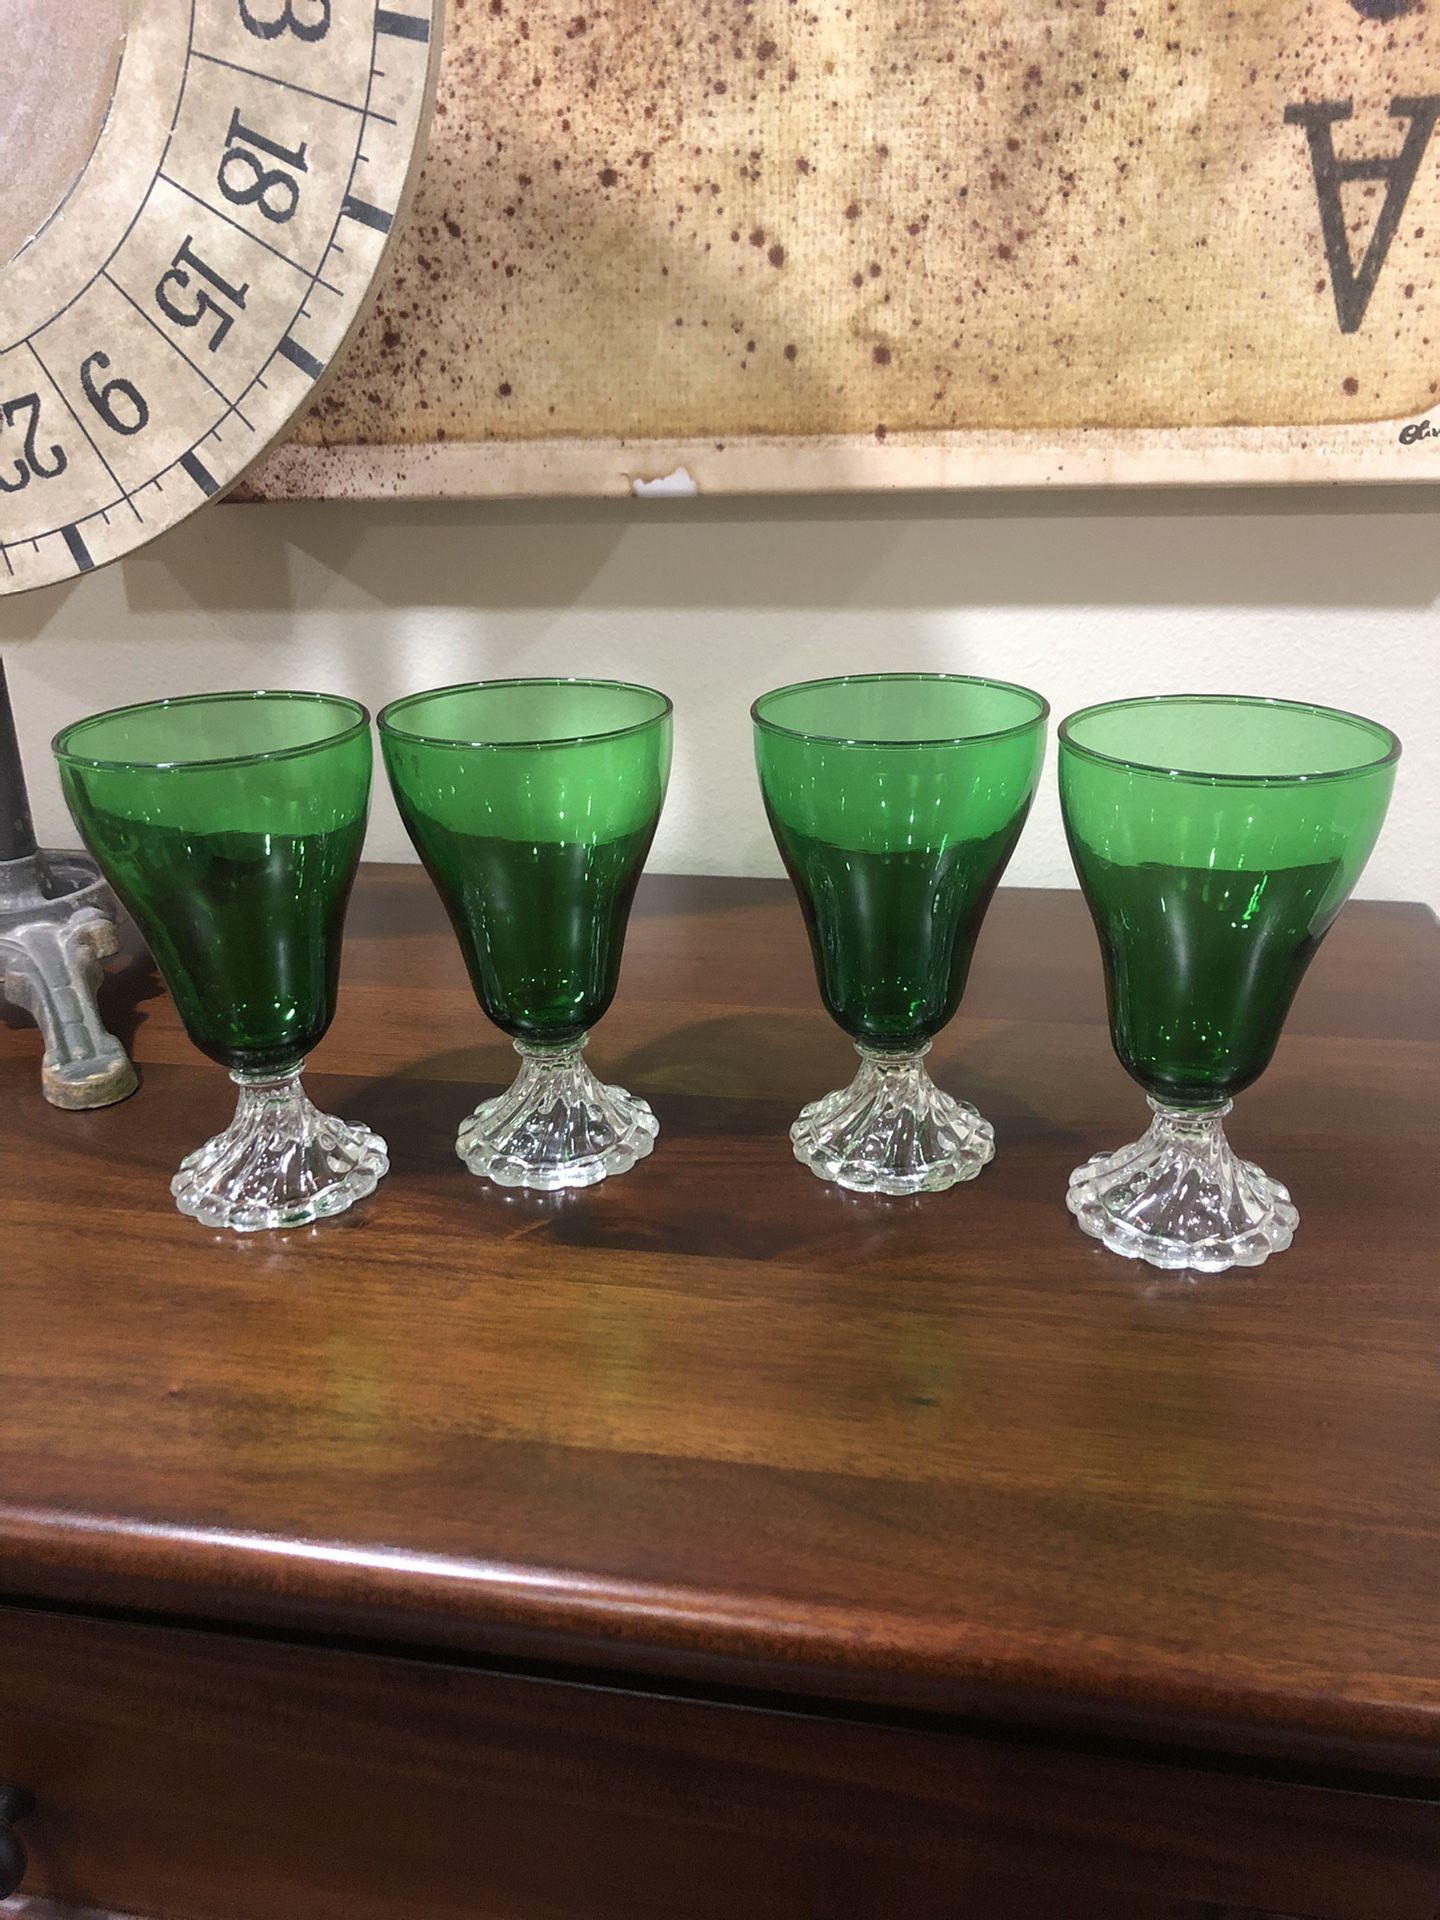 1940 Burple Inspiration Green Footed Timblers (set of 4)